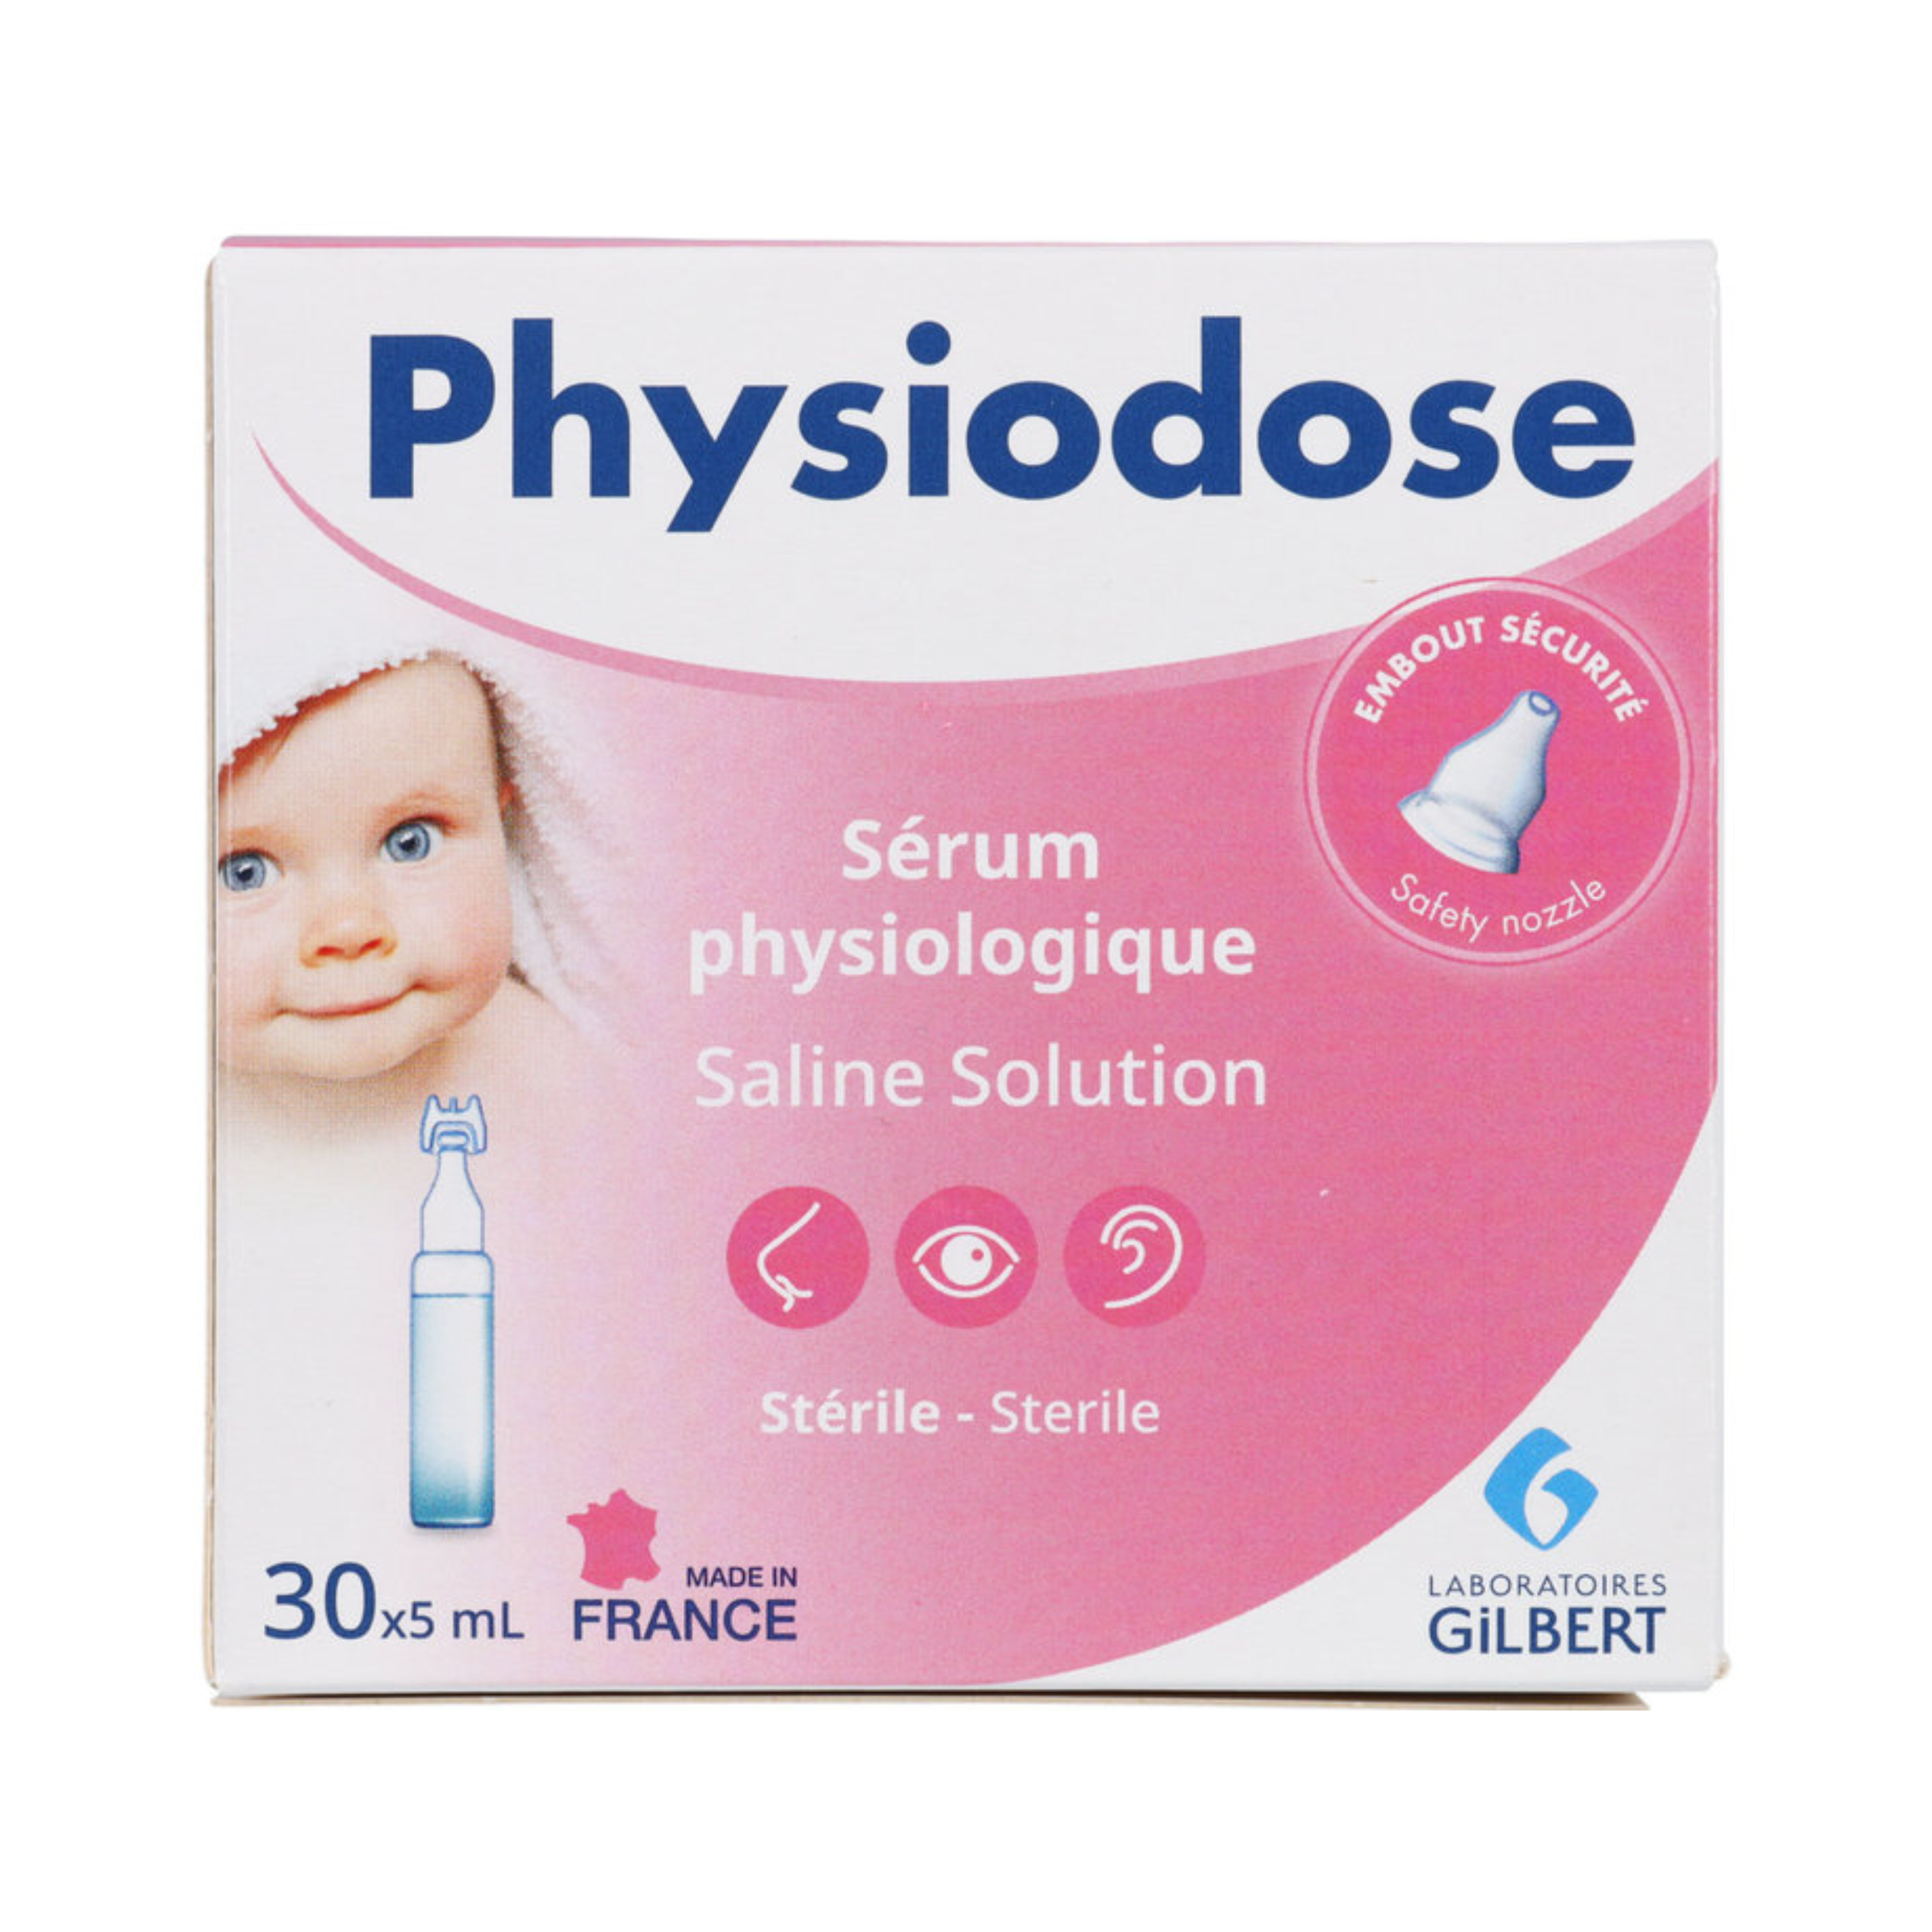 Physiodose - Physiological Serum 30x5ml – The French Pharmacy